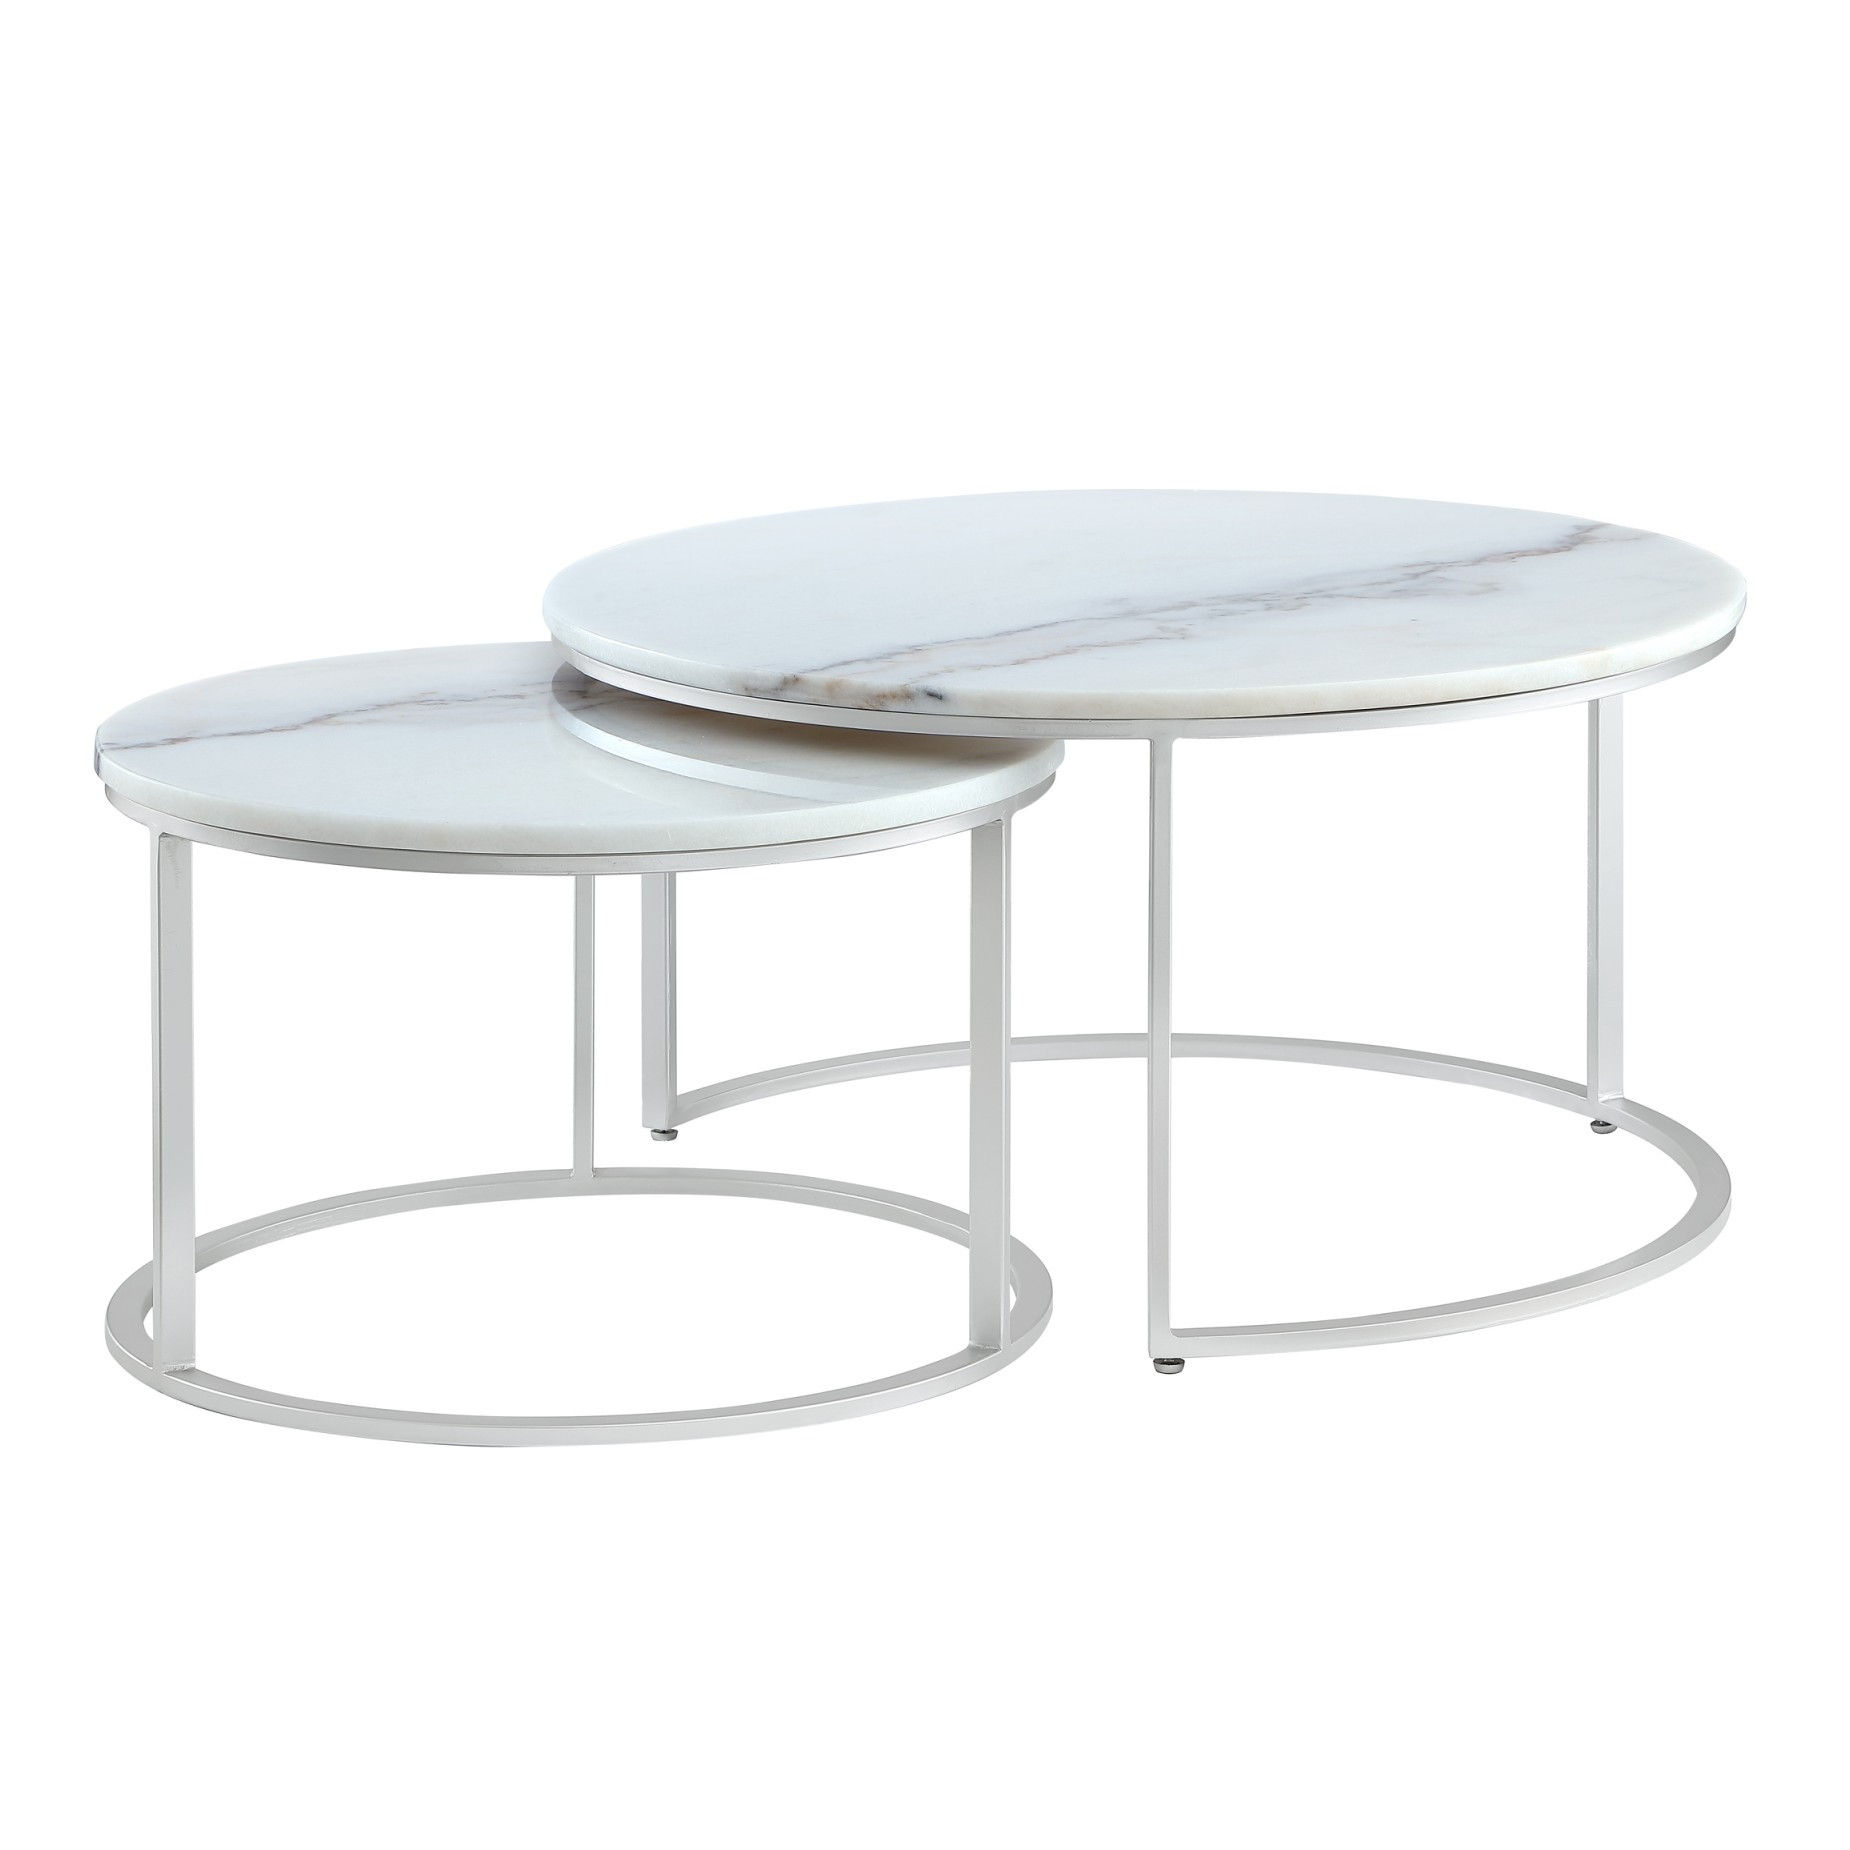 Set of Two 31" White And Silver Genuine Marble And Iron Round Nested Coffee Tables-543850-1